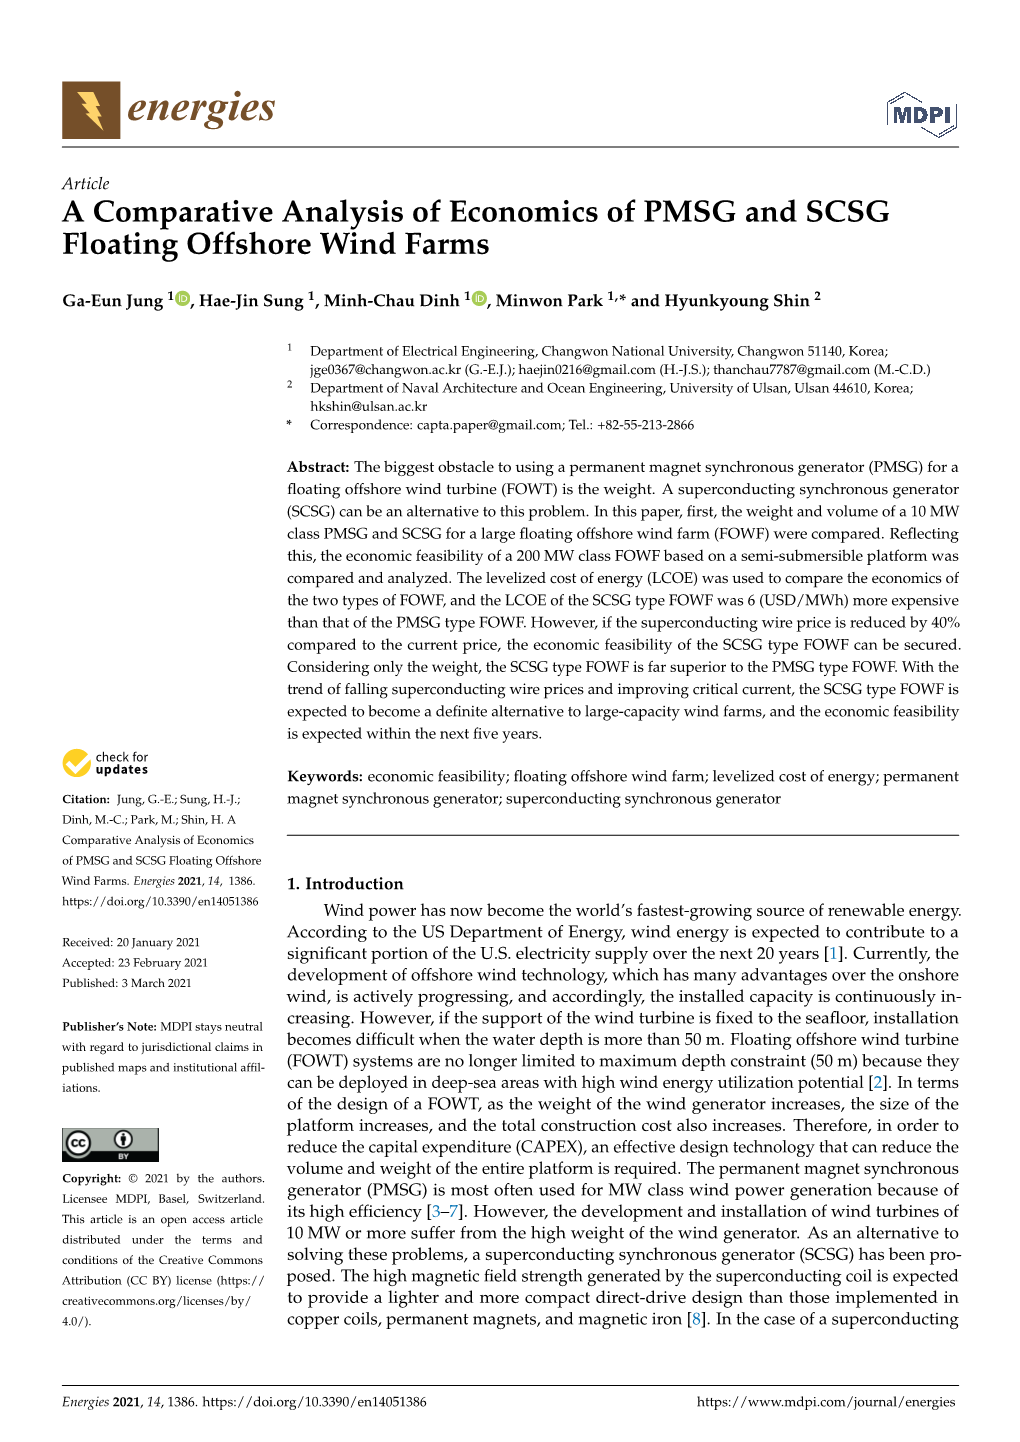 A Comparative Analysis of Economics of PMSG and SCSG Floating Offshore Wind Farms